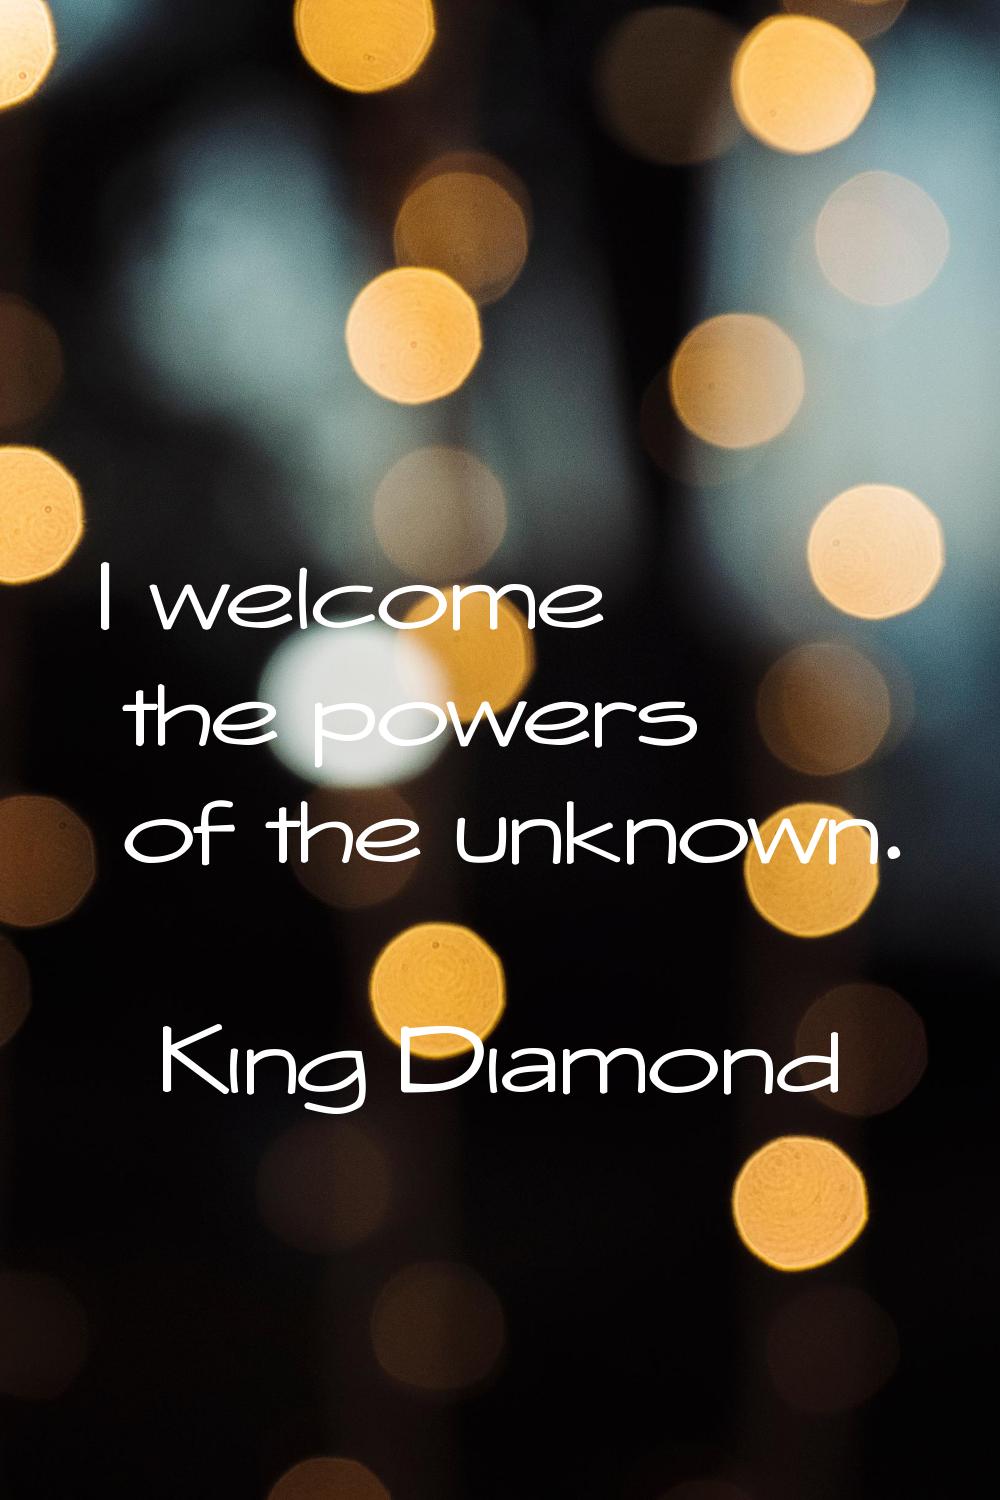 I welcome the powers of the unknown.